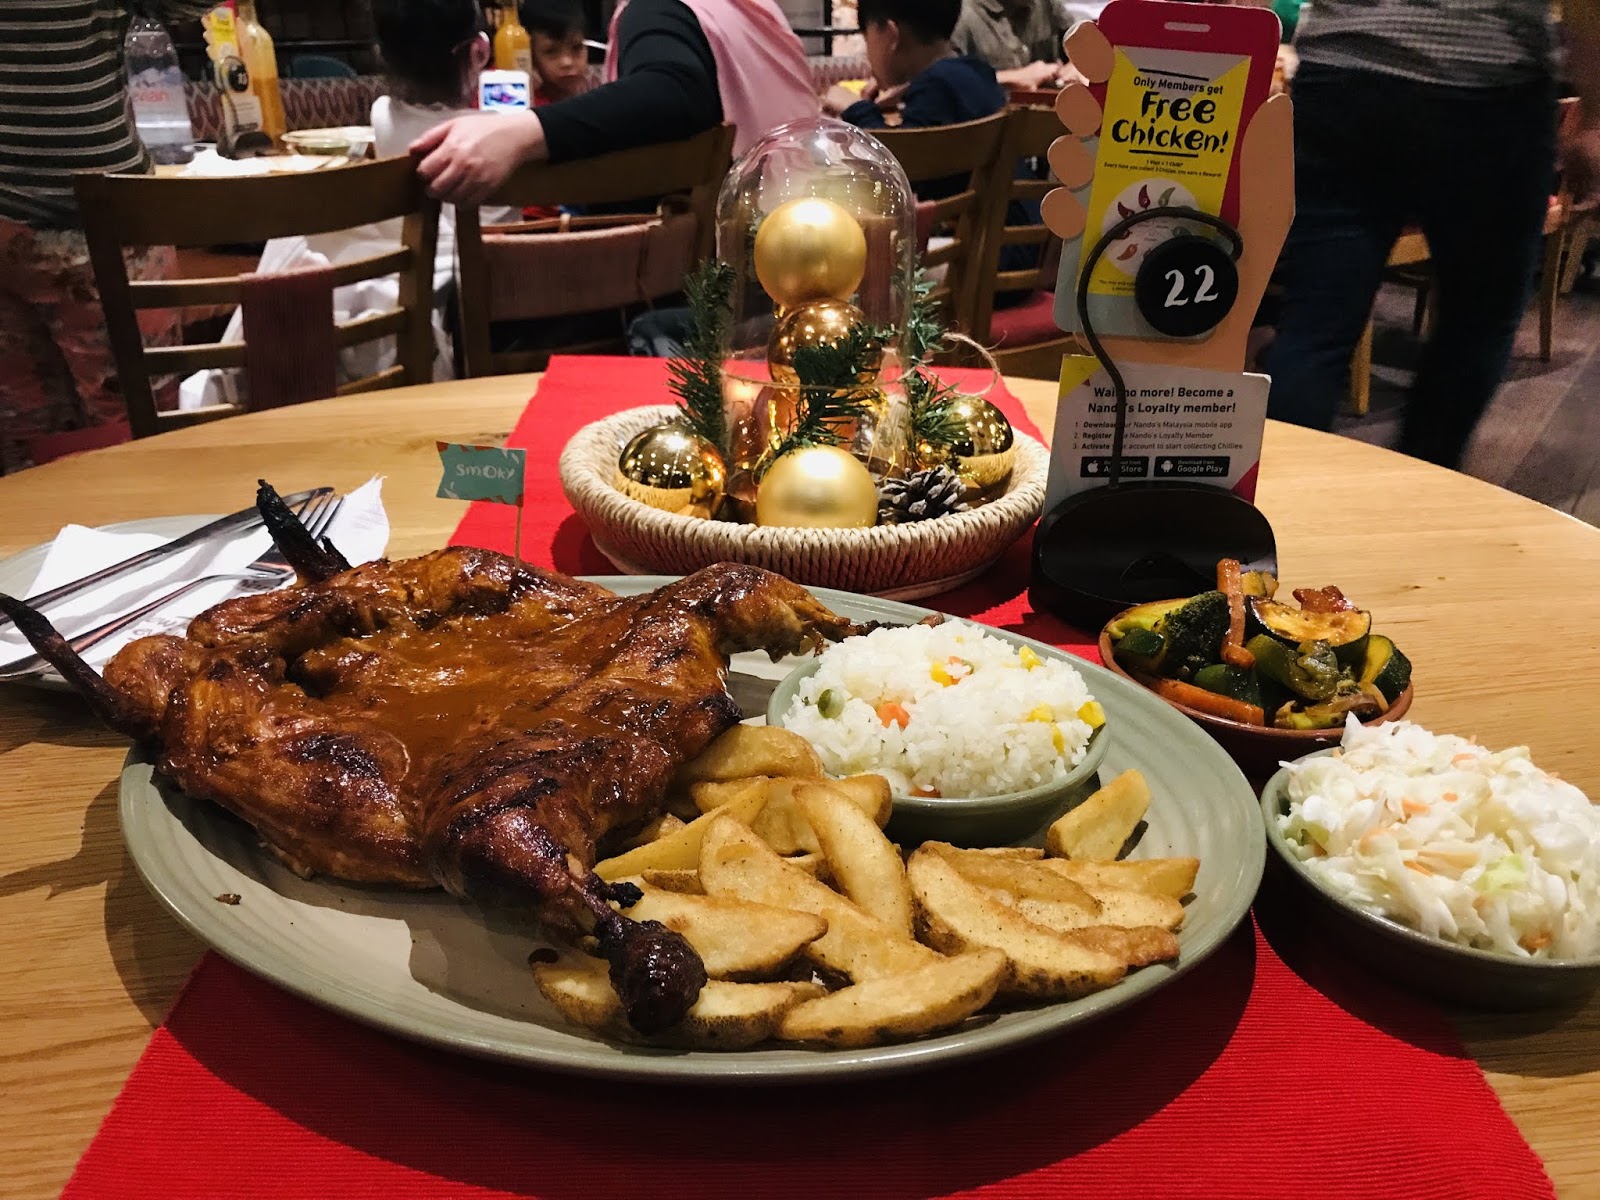 Get Ready for a SUPER-Natural experience with Nando’s Smoky PERi-PERi